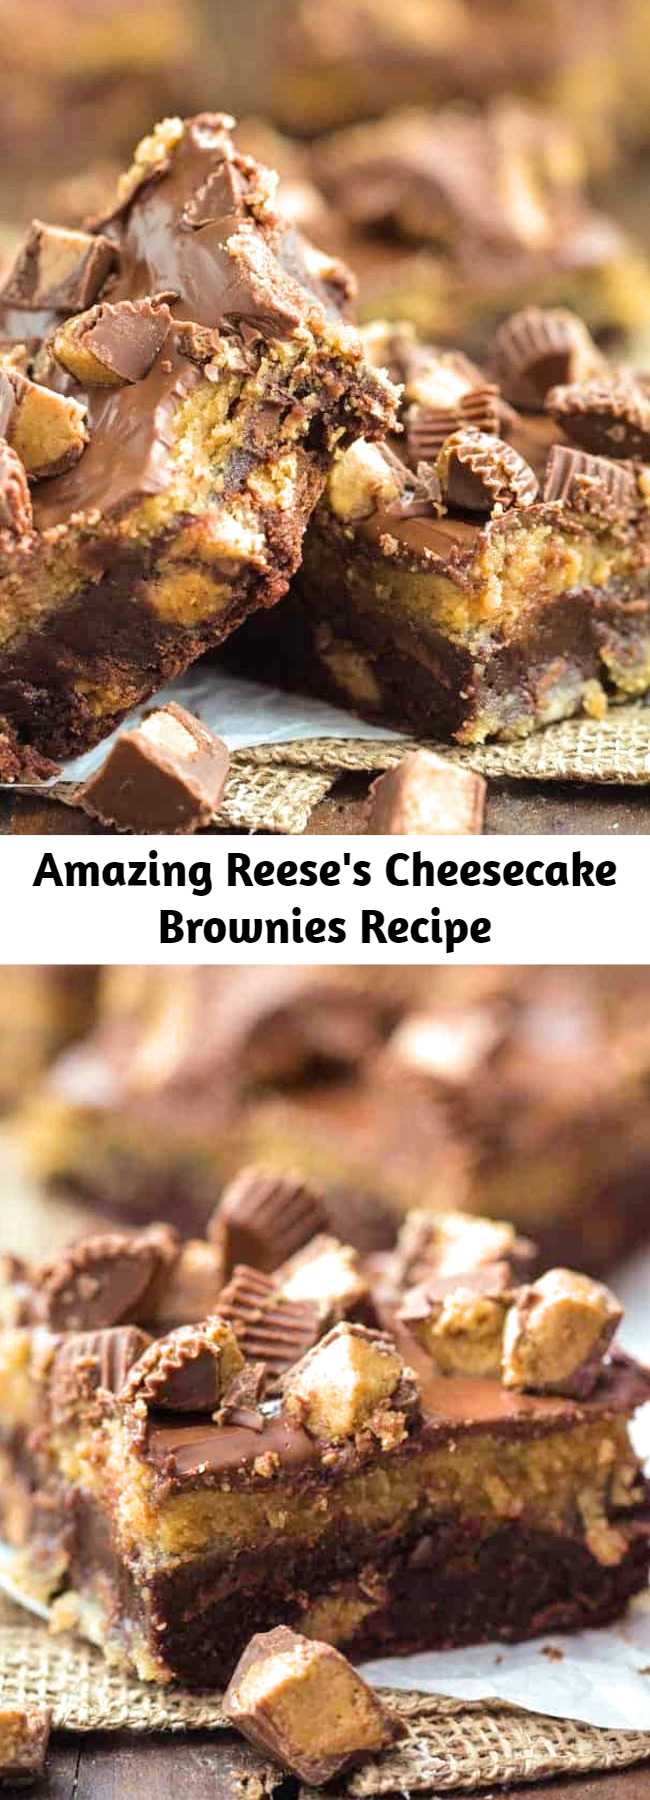 A Reese's Peanut Butter Cup heaven! It's for the ultimate Reese's lover! A fudgy brownie stuffed with Reese's, a creamy peanut butter cheesecake layer and topped with chocolate! These are insanely good!